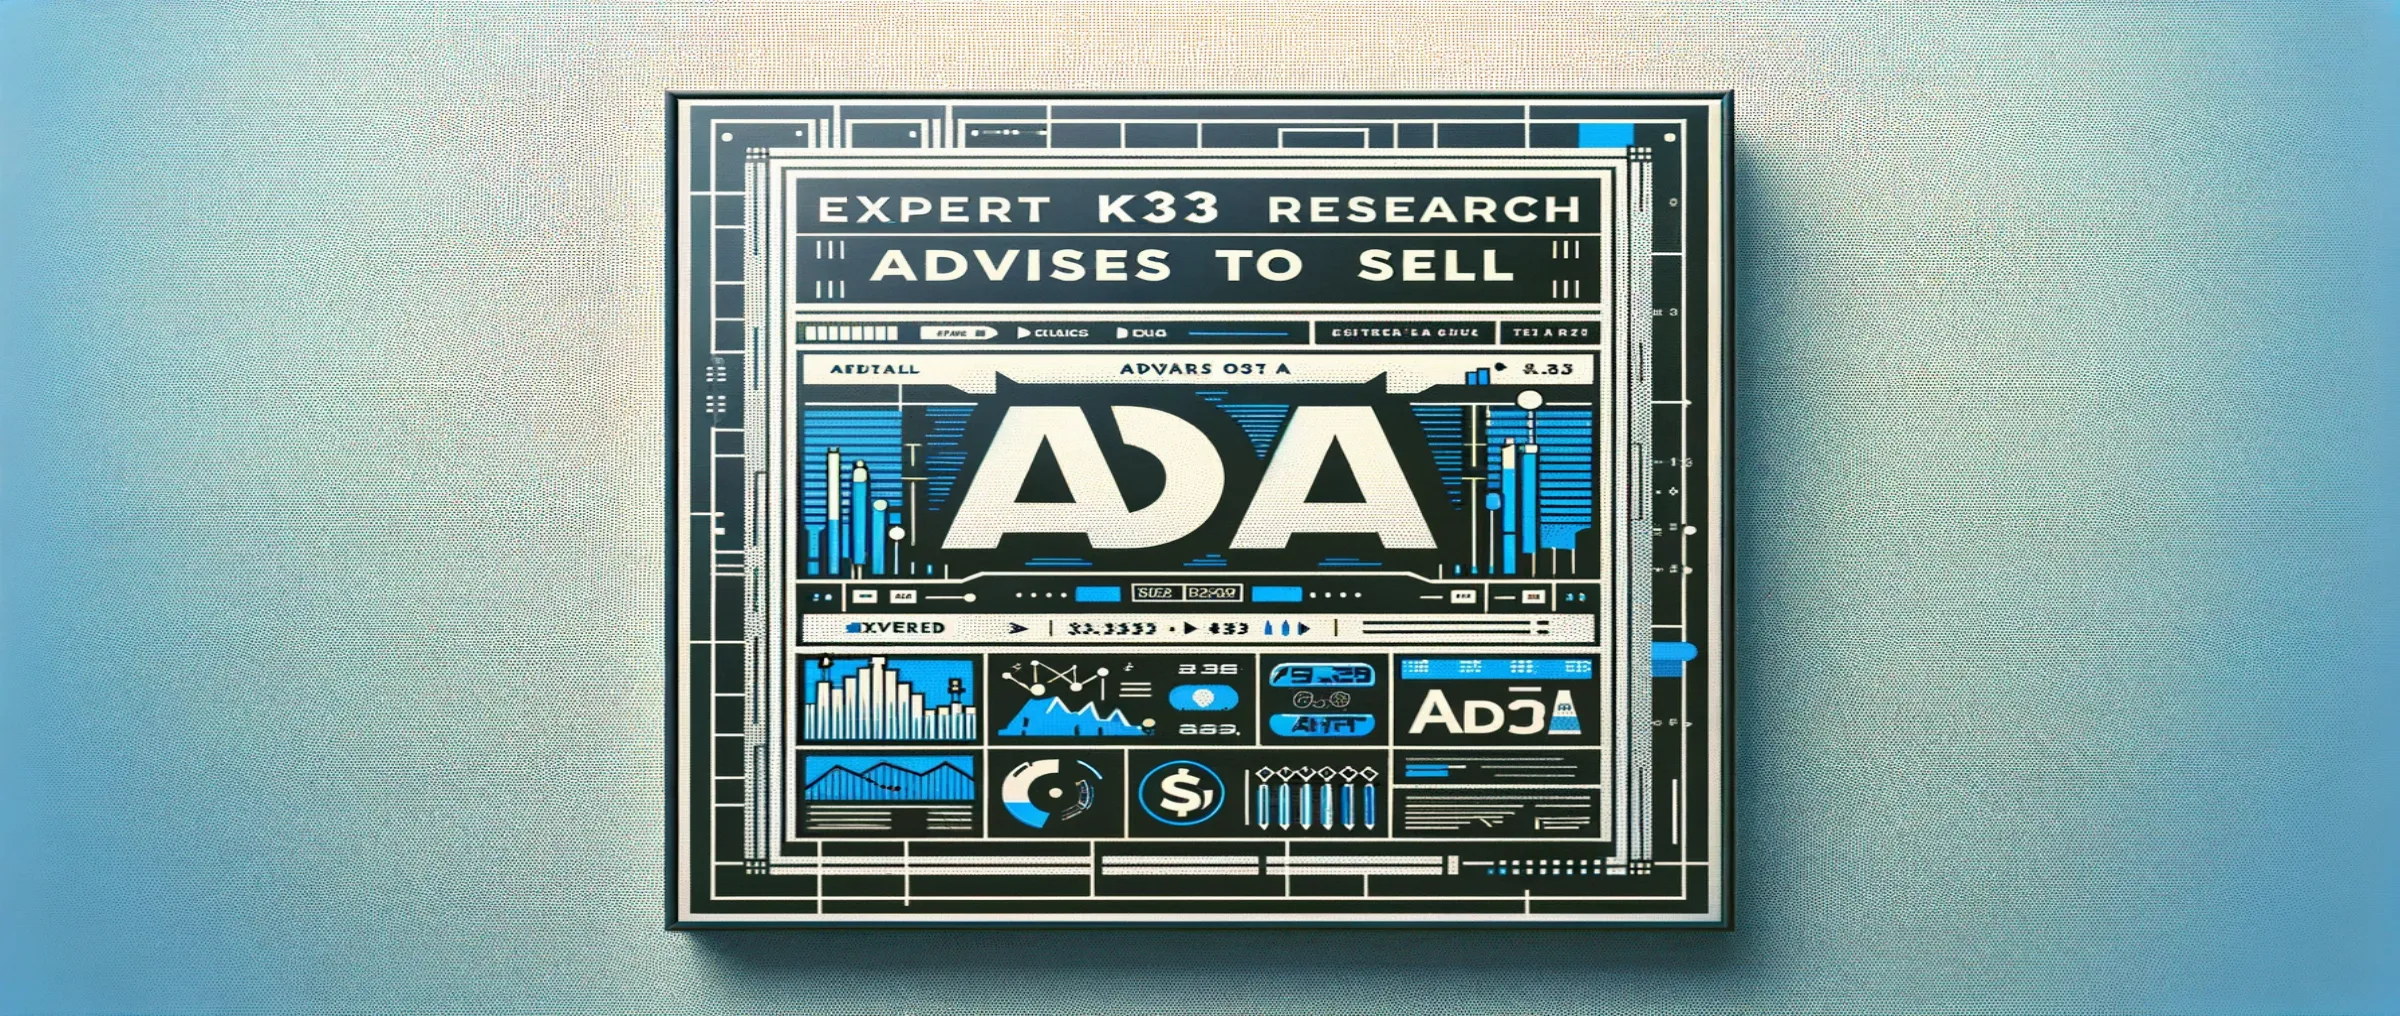 K33 Research expert advises to sell ADA